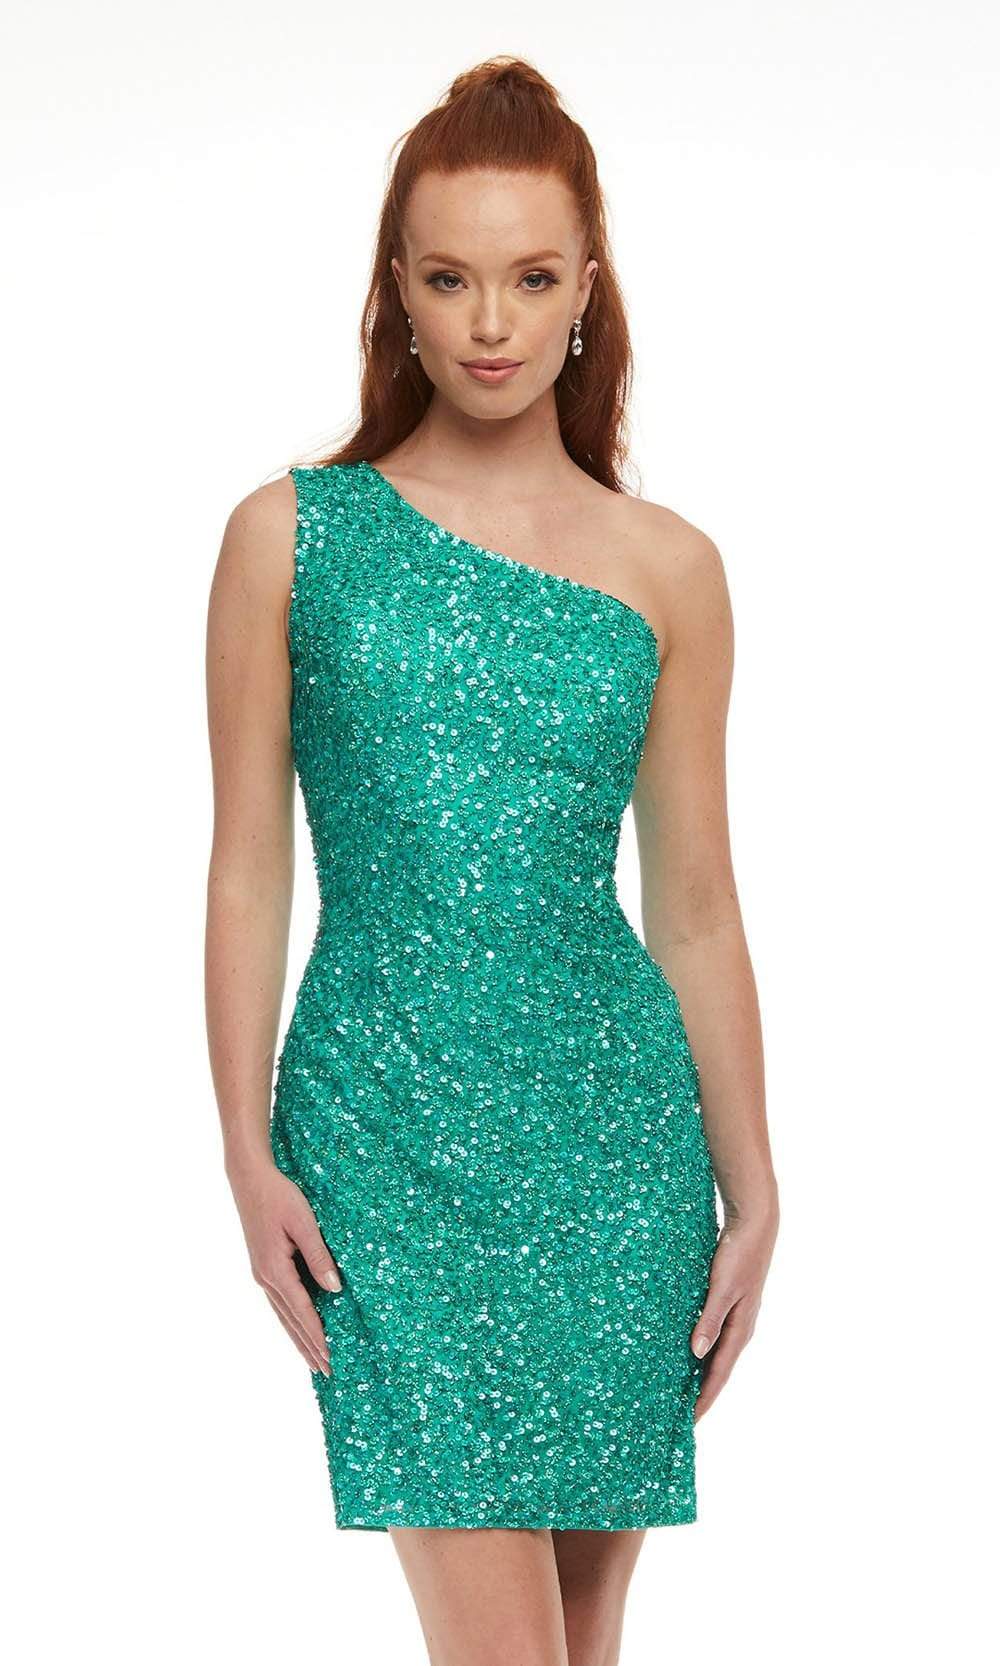 Ashley Lauren - 4469 Cutout Lace-up Back Fully Beaded Cocktail Dress Cocktail Dresses 00 / Jade